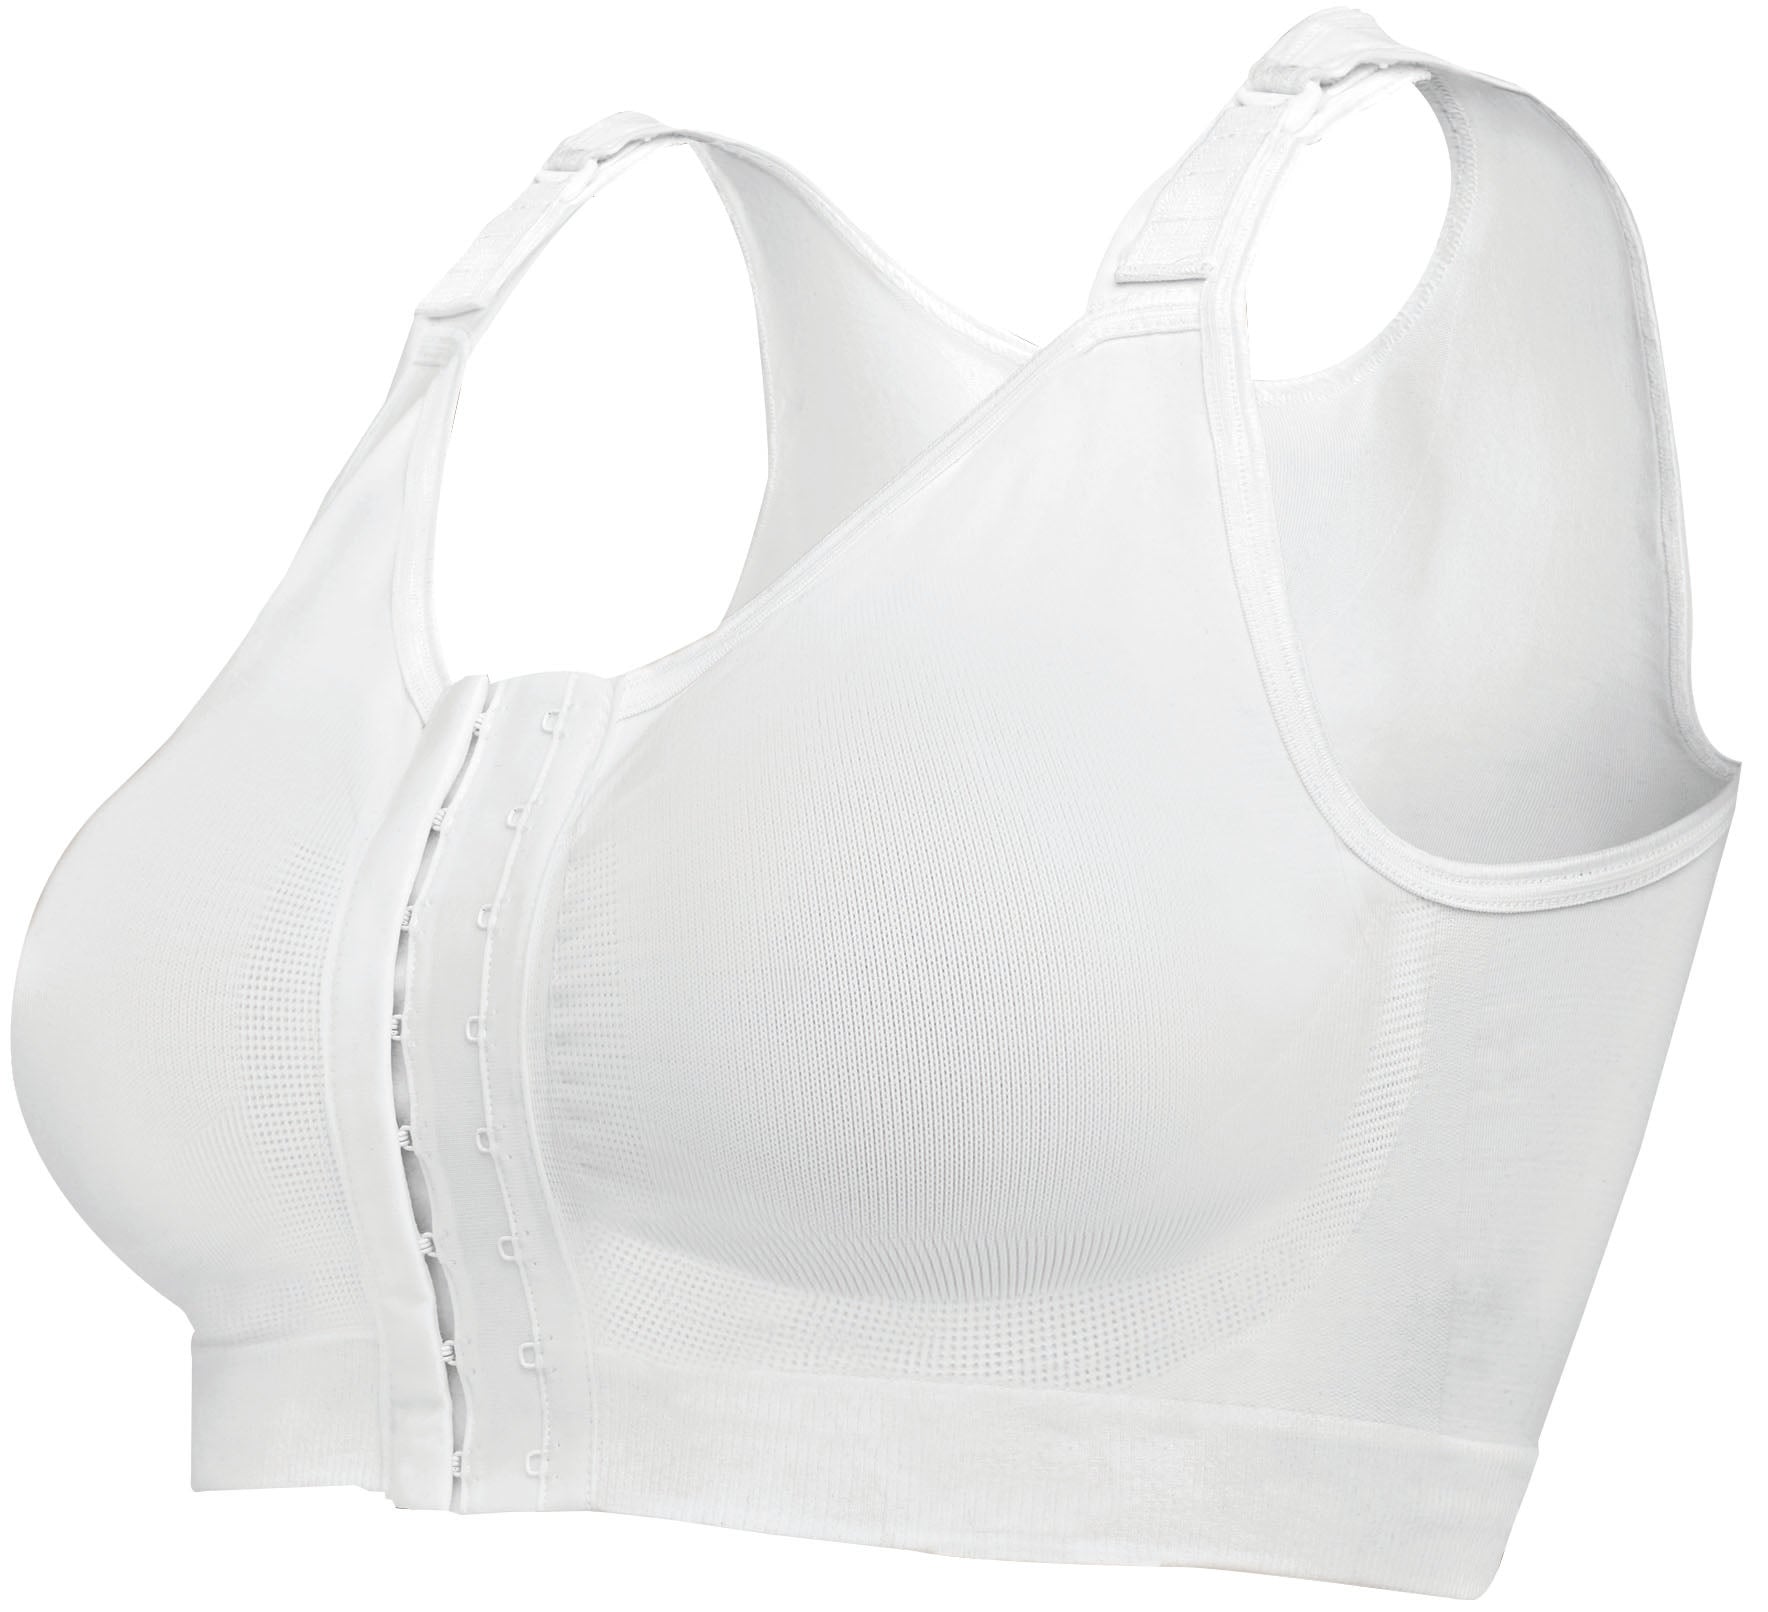 Reco Bra Post Surgical Bra - White (£42 with VAT Exemption)